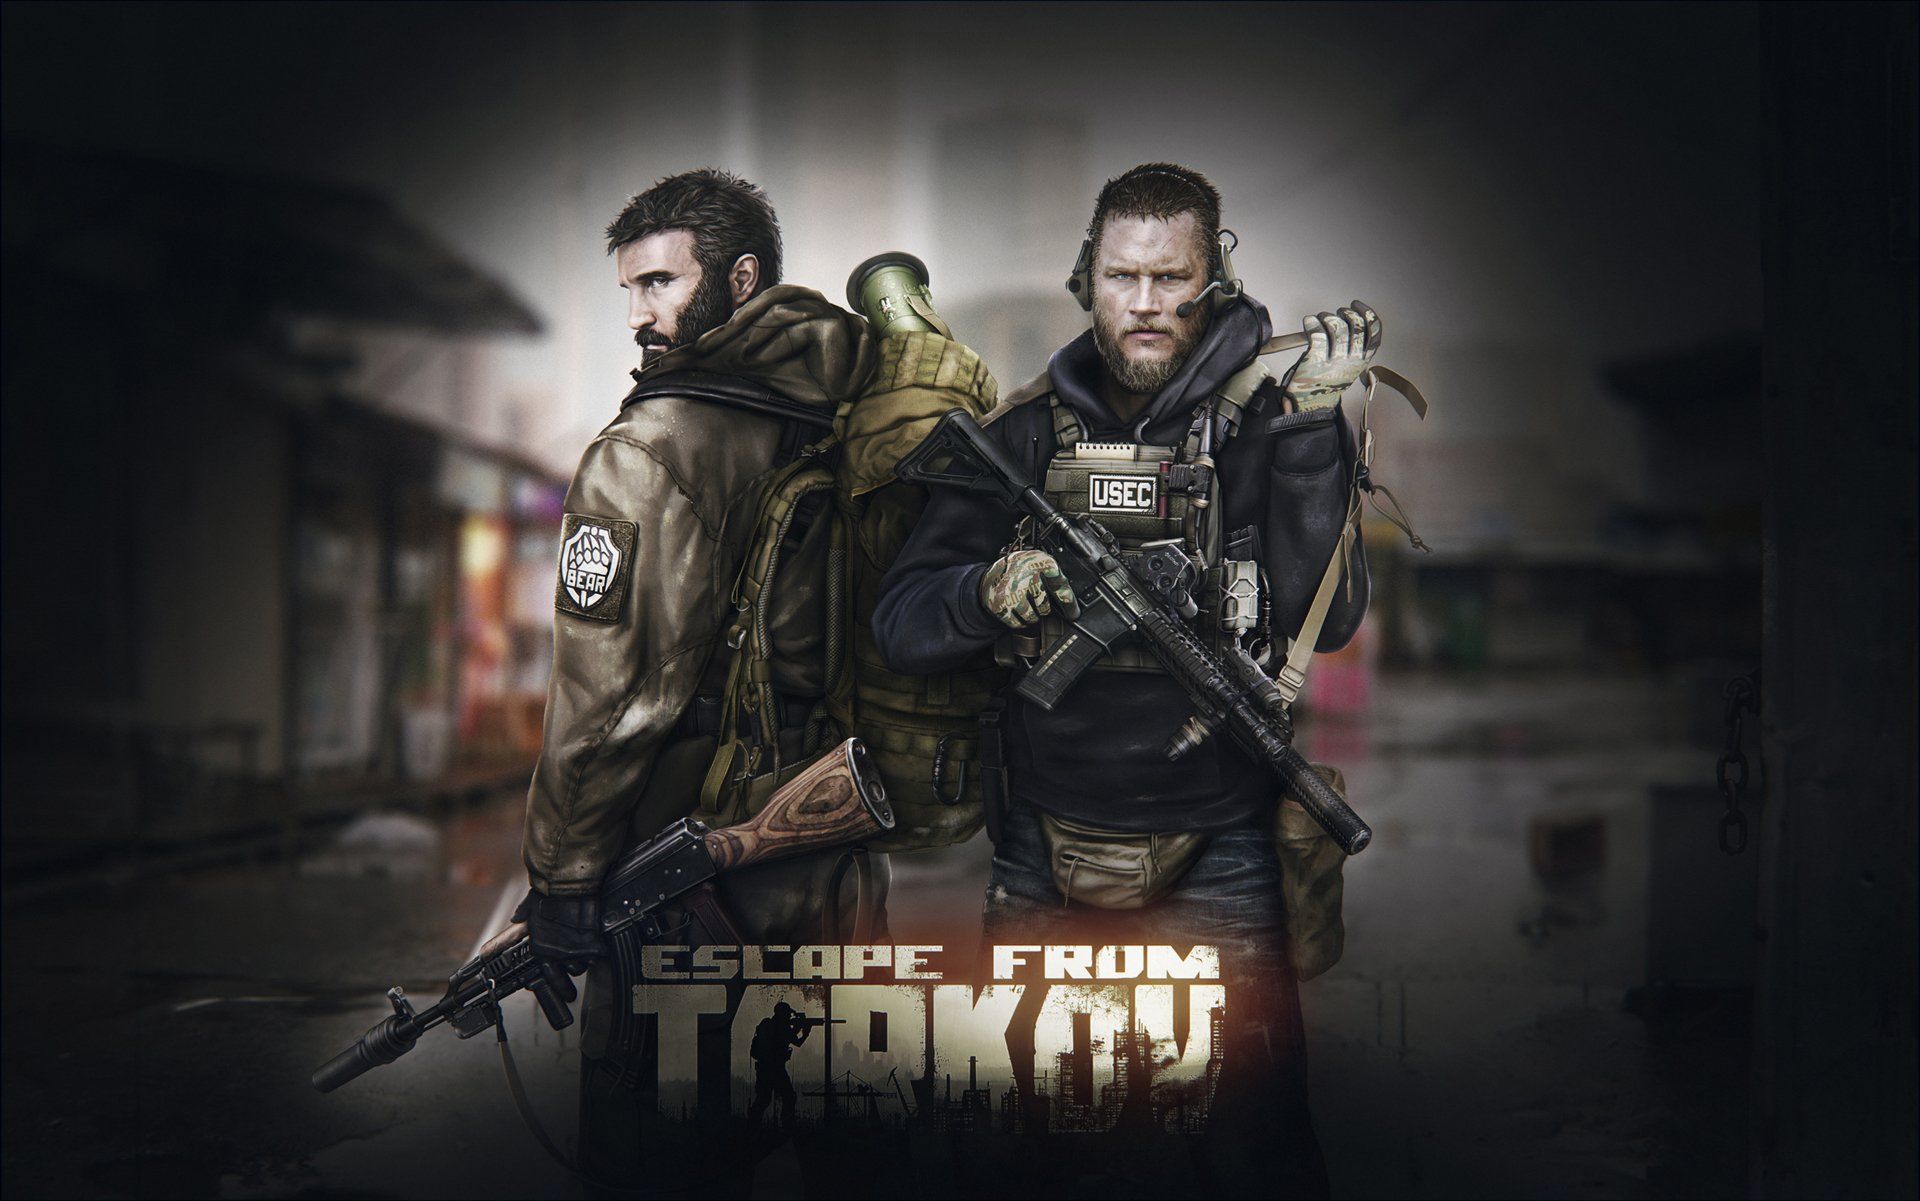 Is Escape from Tarkov on Steam